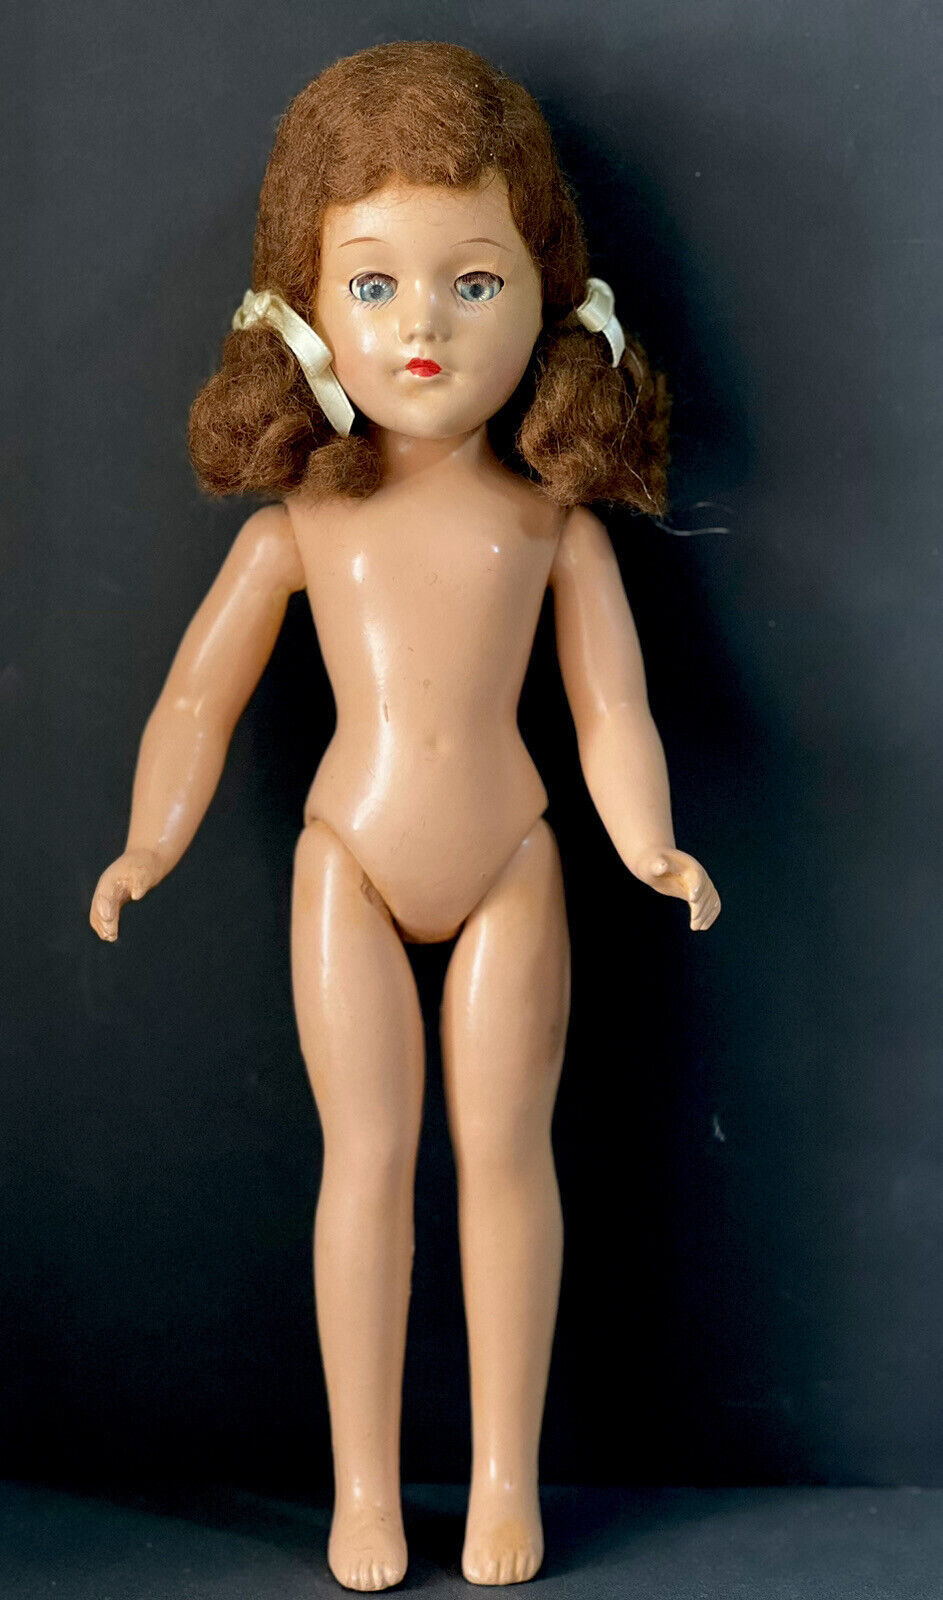 Collectible Vintage 1940’s Composition 14” Original Mary Hoyer Doll